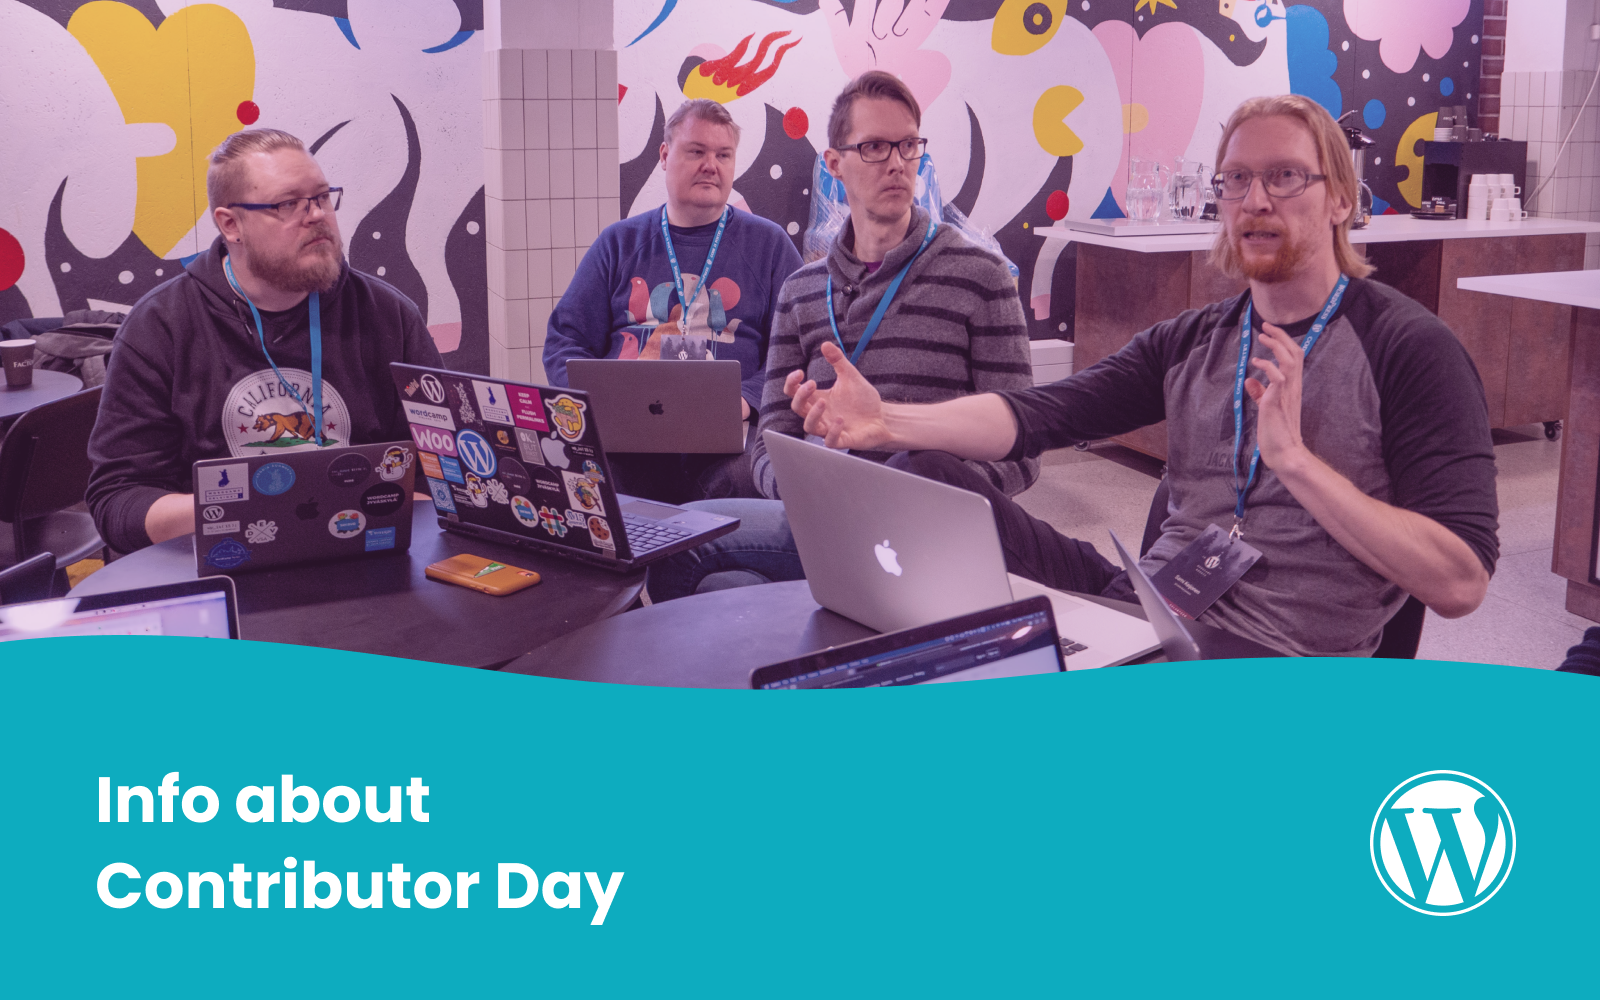 Info about Contributor Day